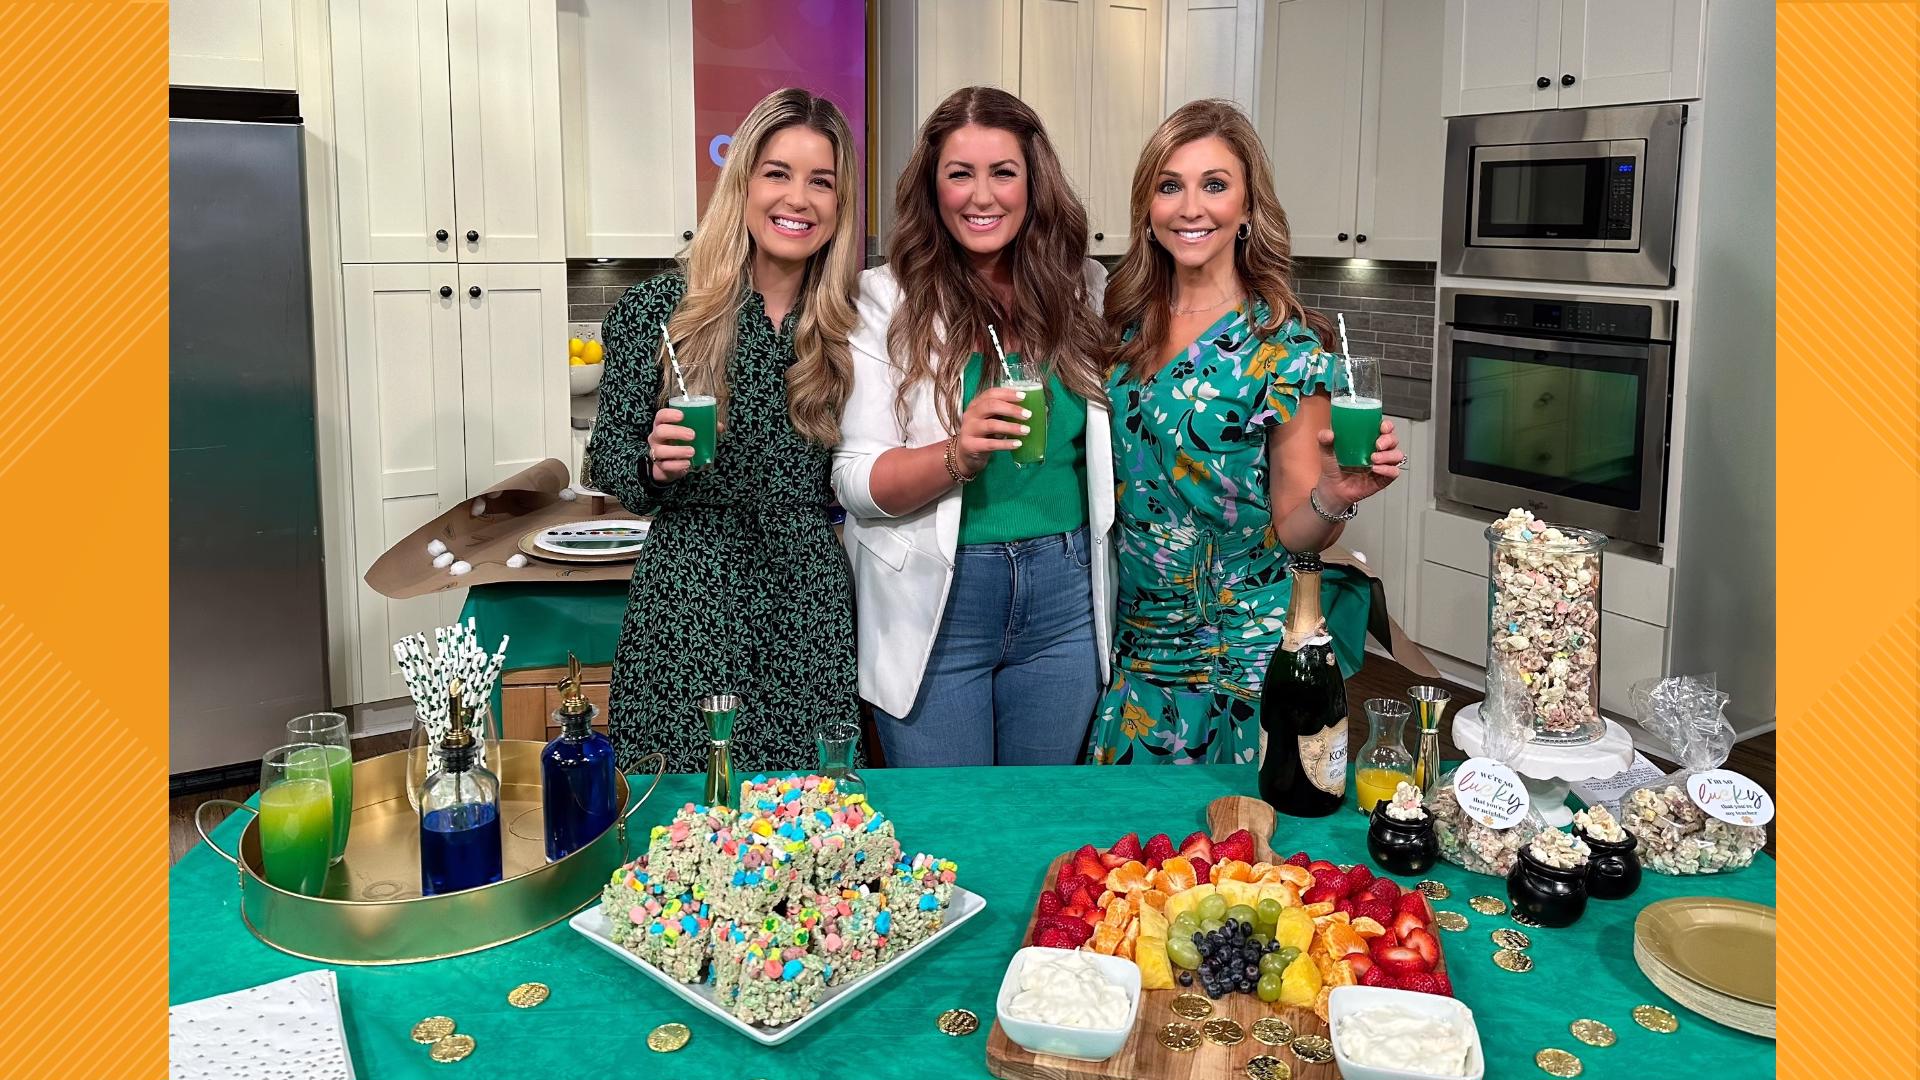 Mommy blogger and DIY expert Katie Ray shares St. Patrick's Day activities/snacks for the kids and toasts with a pot of gold mimosa.